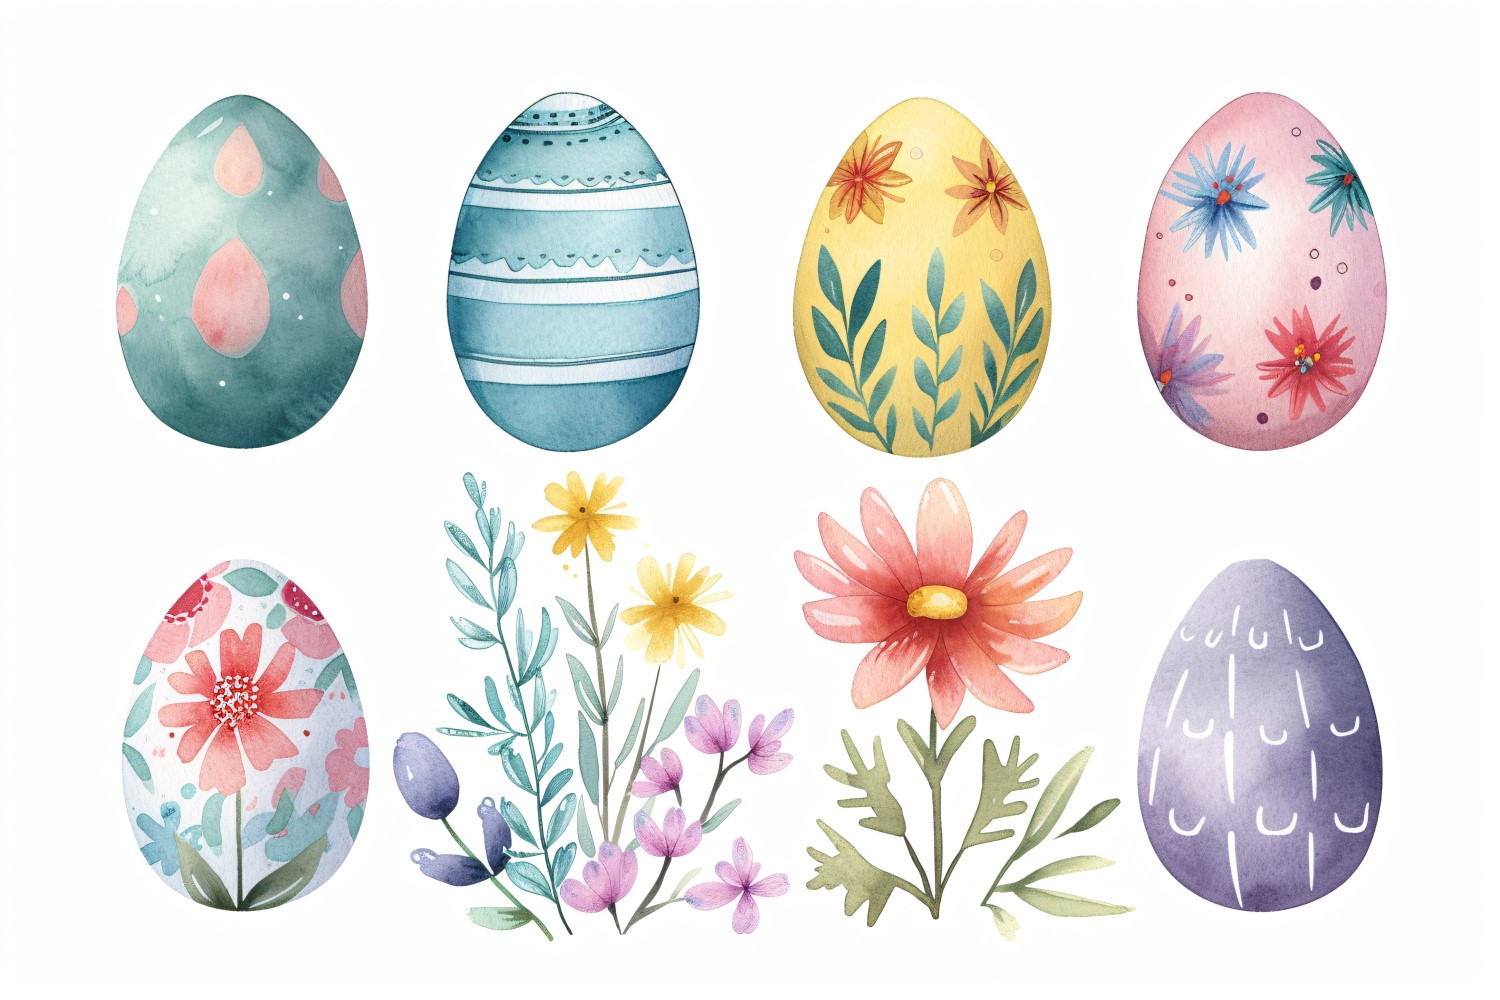 Colourful Watercolour Decorative Easter Egg & Spring Flower 167